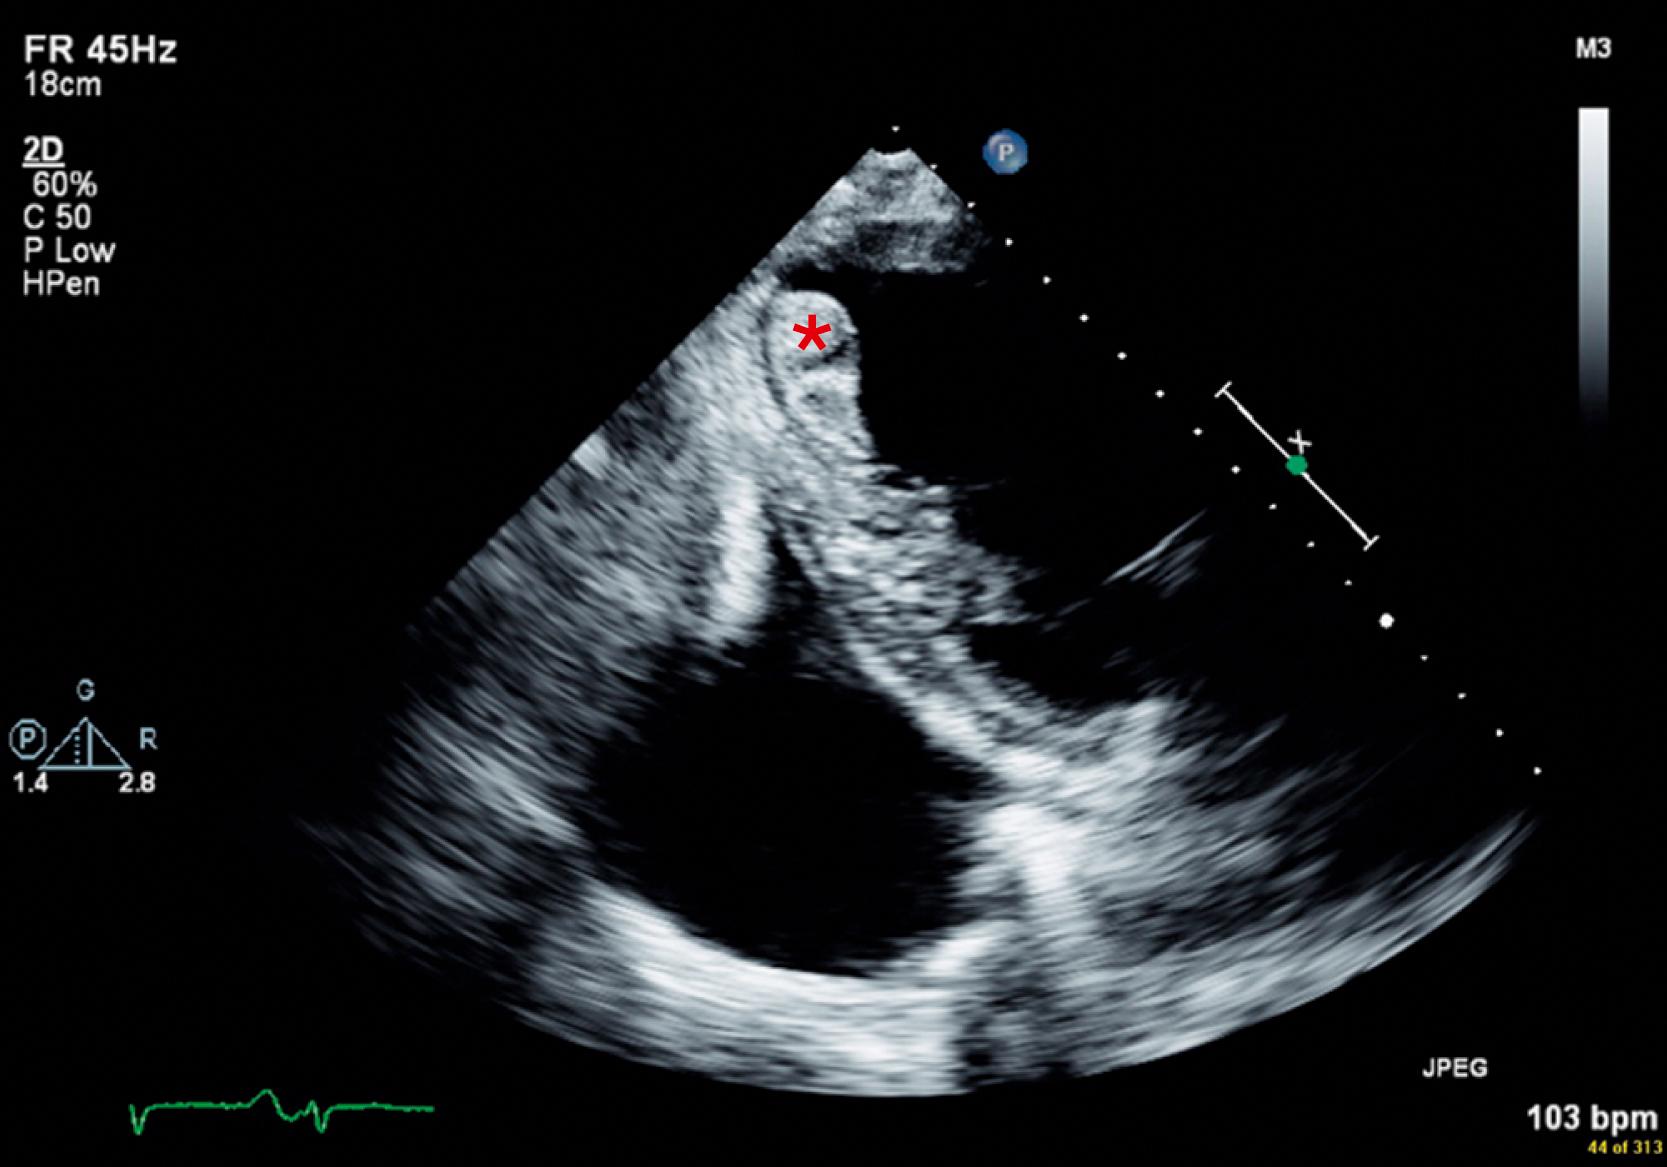 Fig. 32.3, Left ventricular apical clot. Large thrombus (star) adherent to the distal inferolateral wall and apical lateral segment in a patient with a cardiomyopathy.